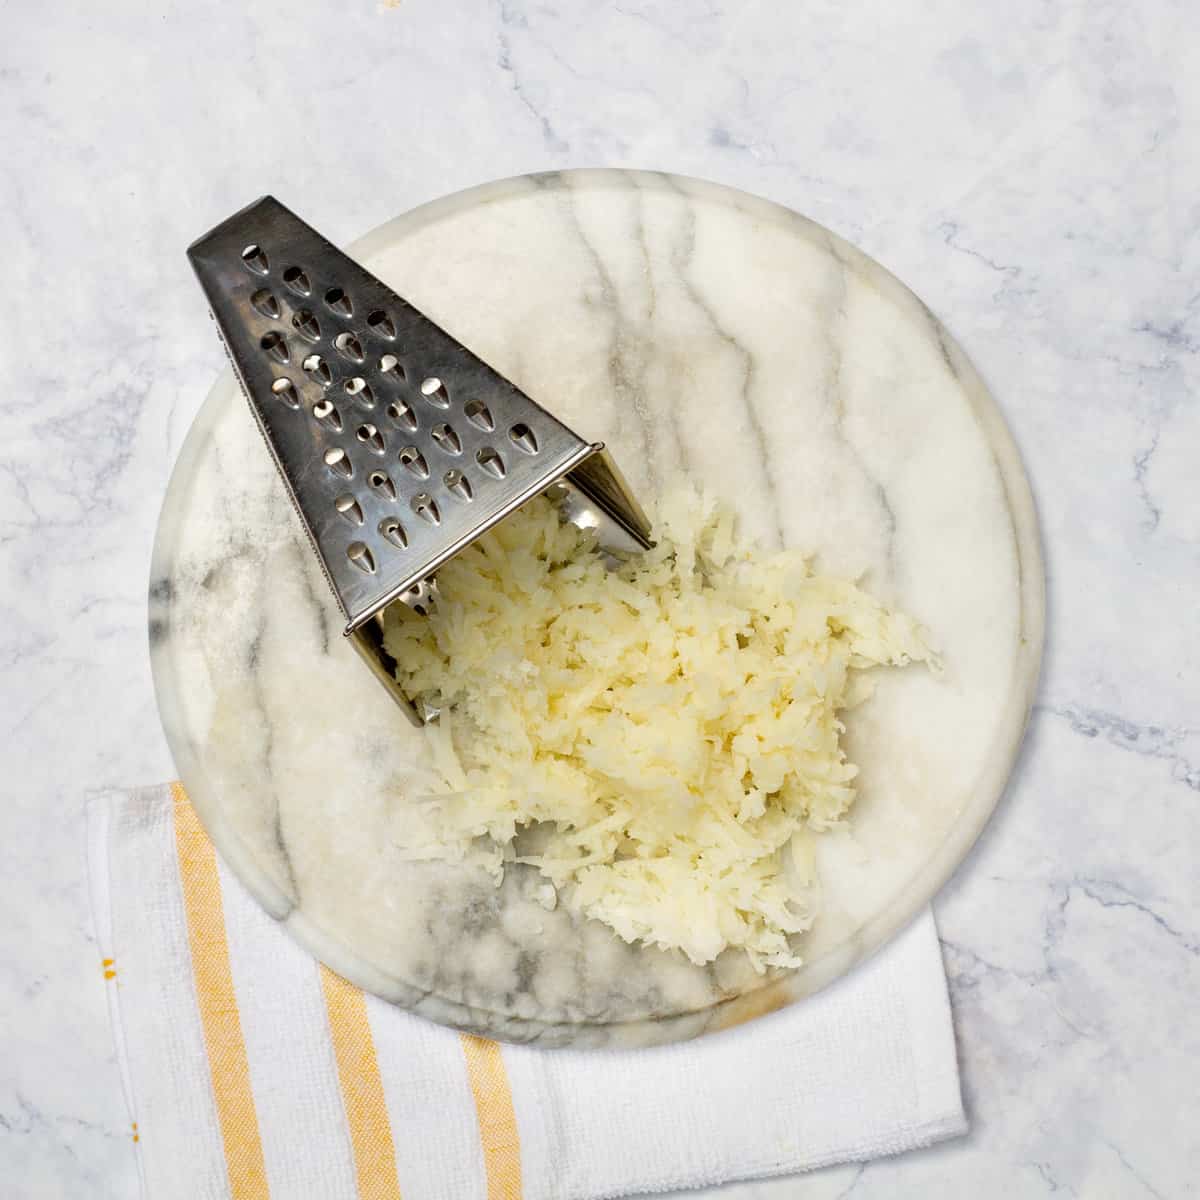 grate the cooked yuca